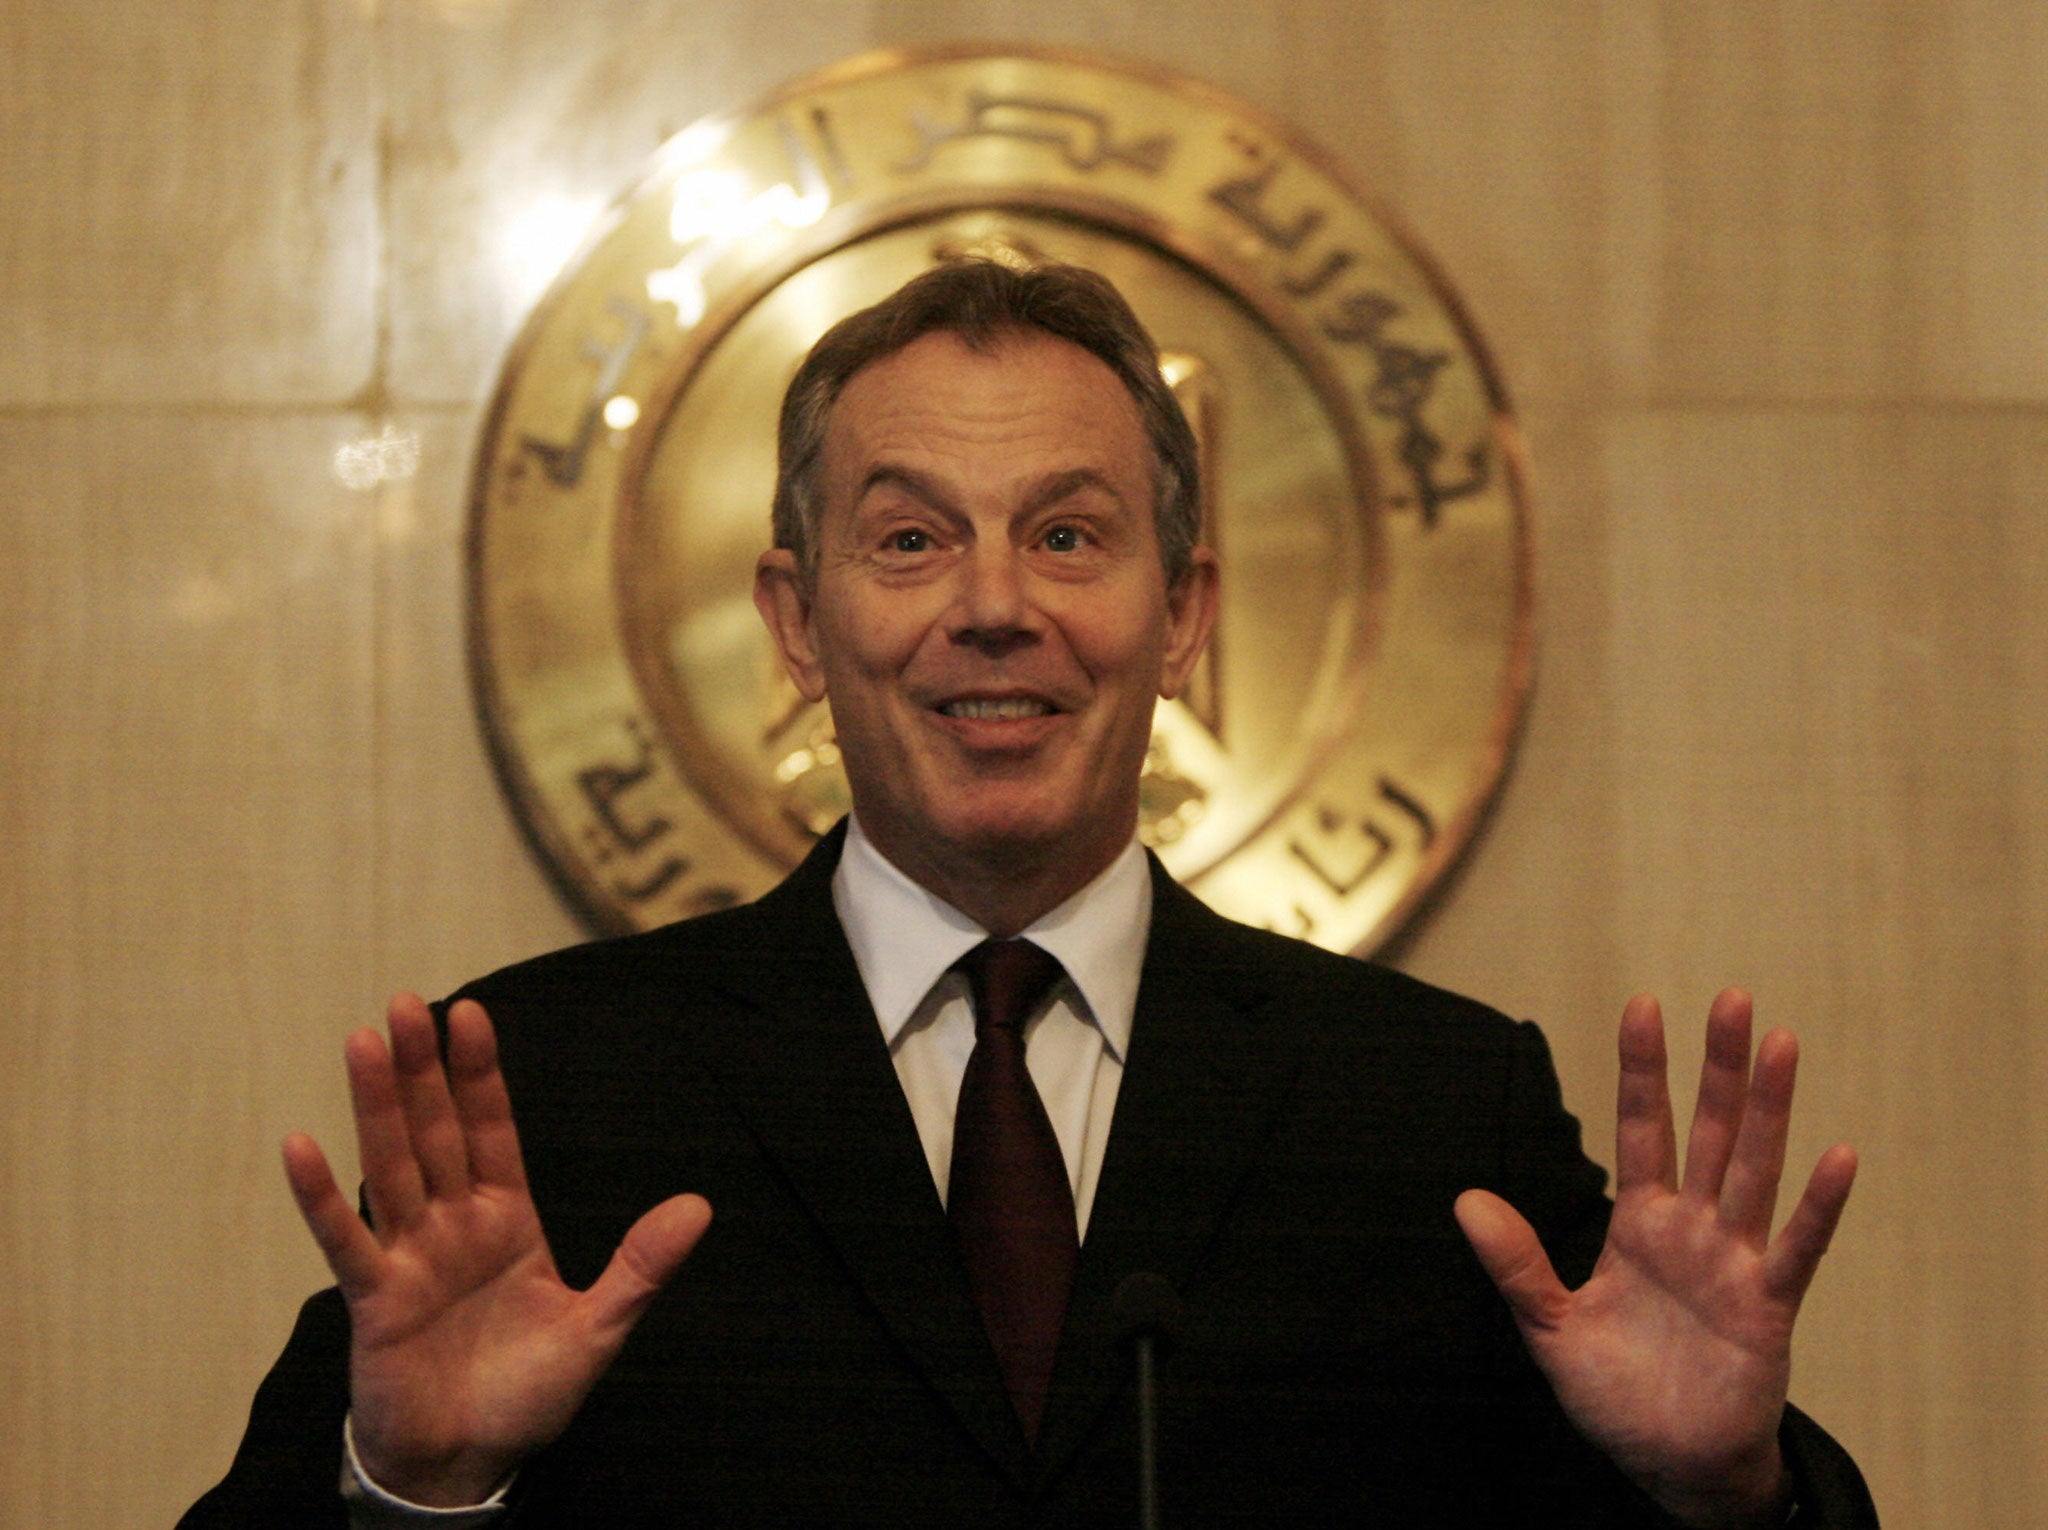 Middle East peace quartet envoy Tony Blair gestures during his press conference following his meeting with Egypt's president Hosni Mubarak in Cairo on January 12, 2009.